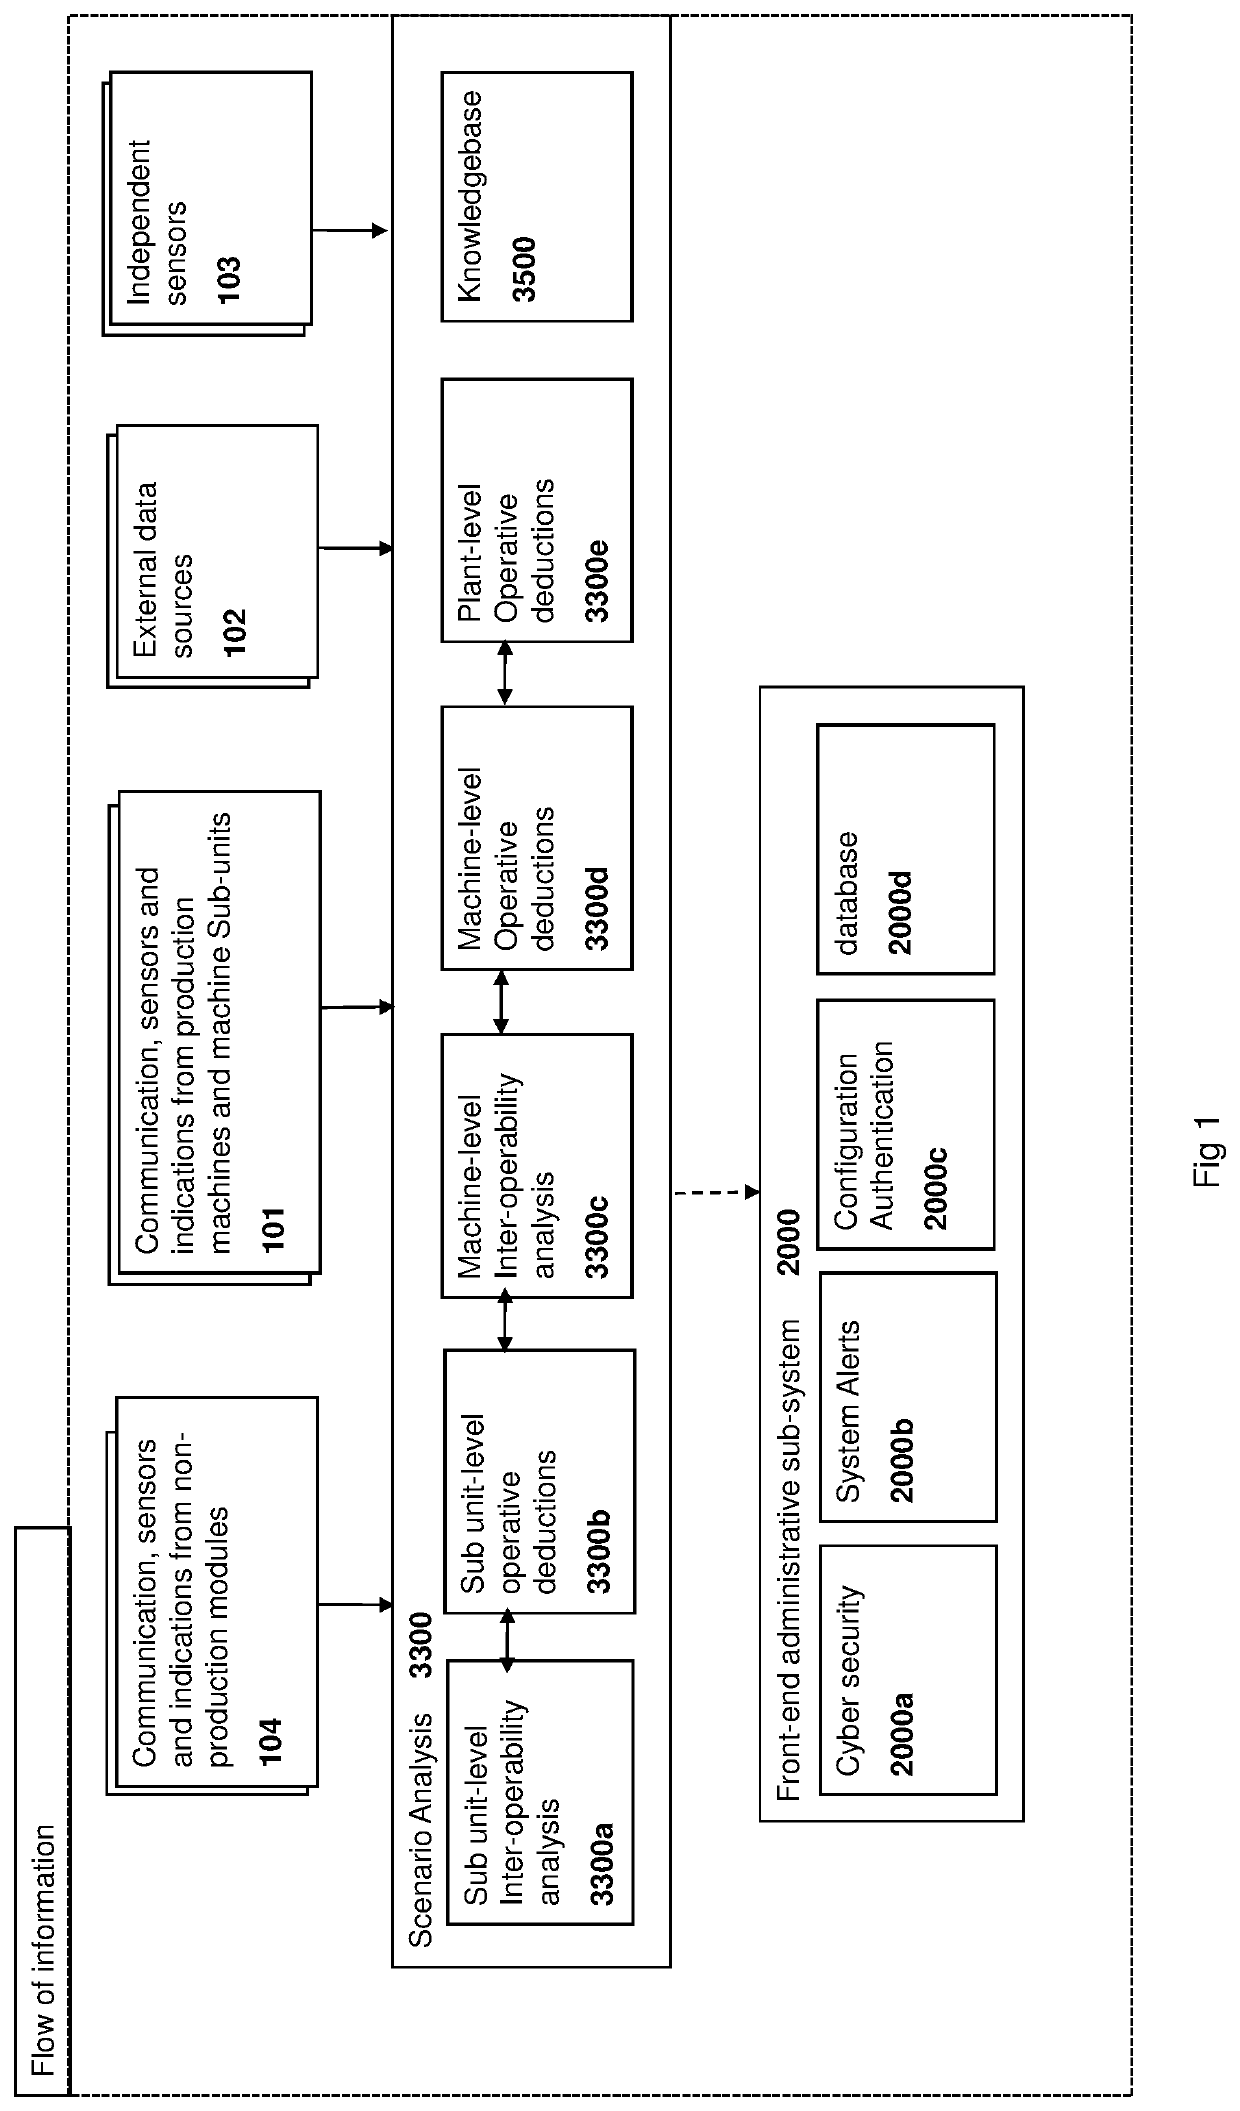 System and method of analyzing and authenticating scenarios and actions that are taking place in a plant or a factory